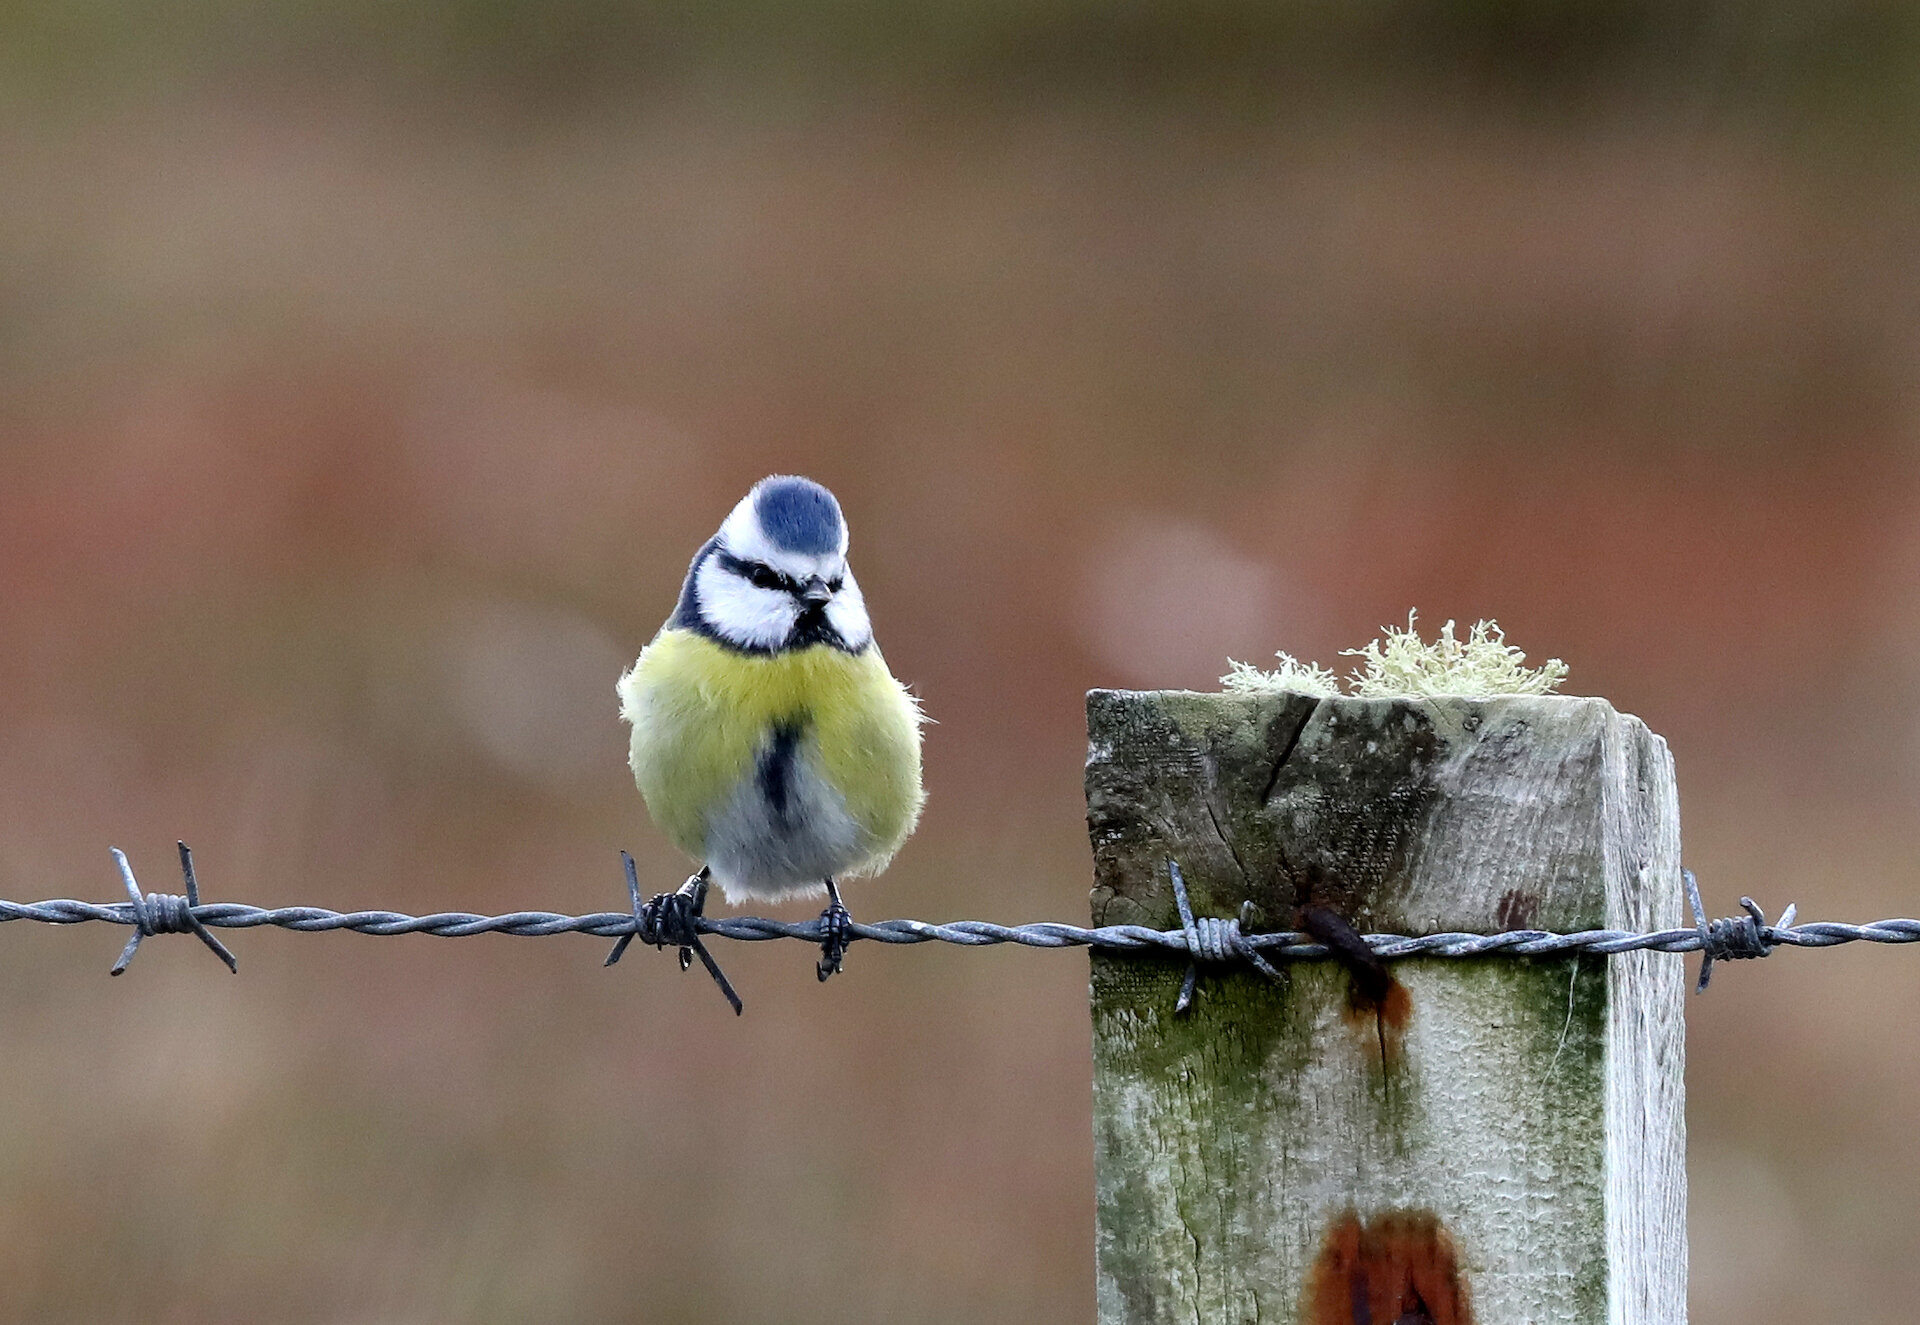 The lesser-spotted blue tit